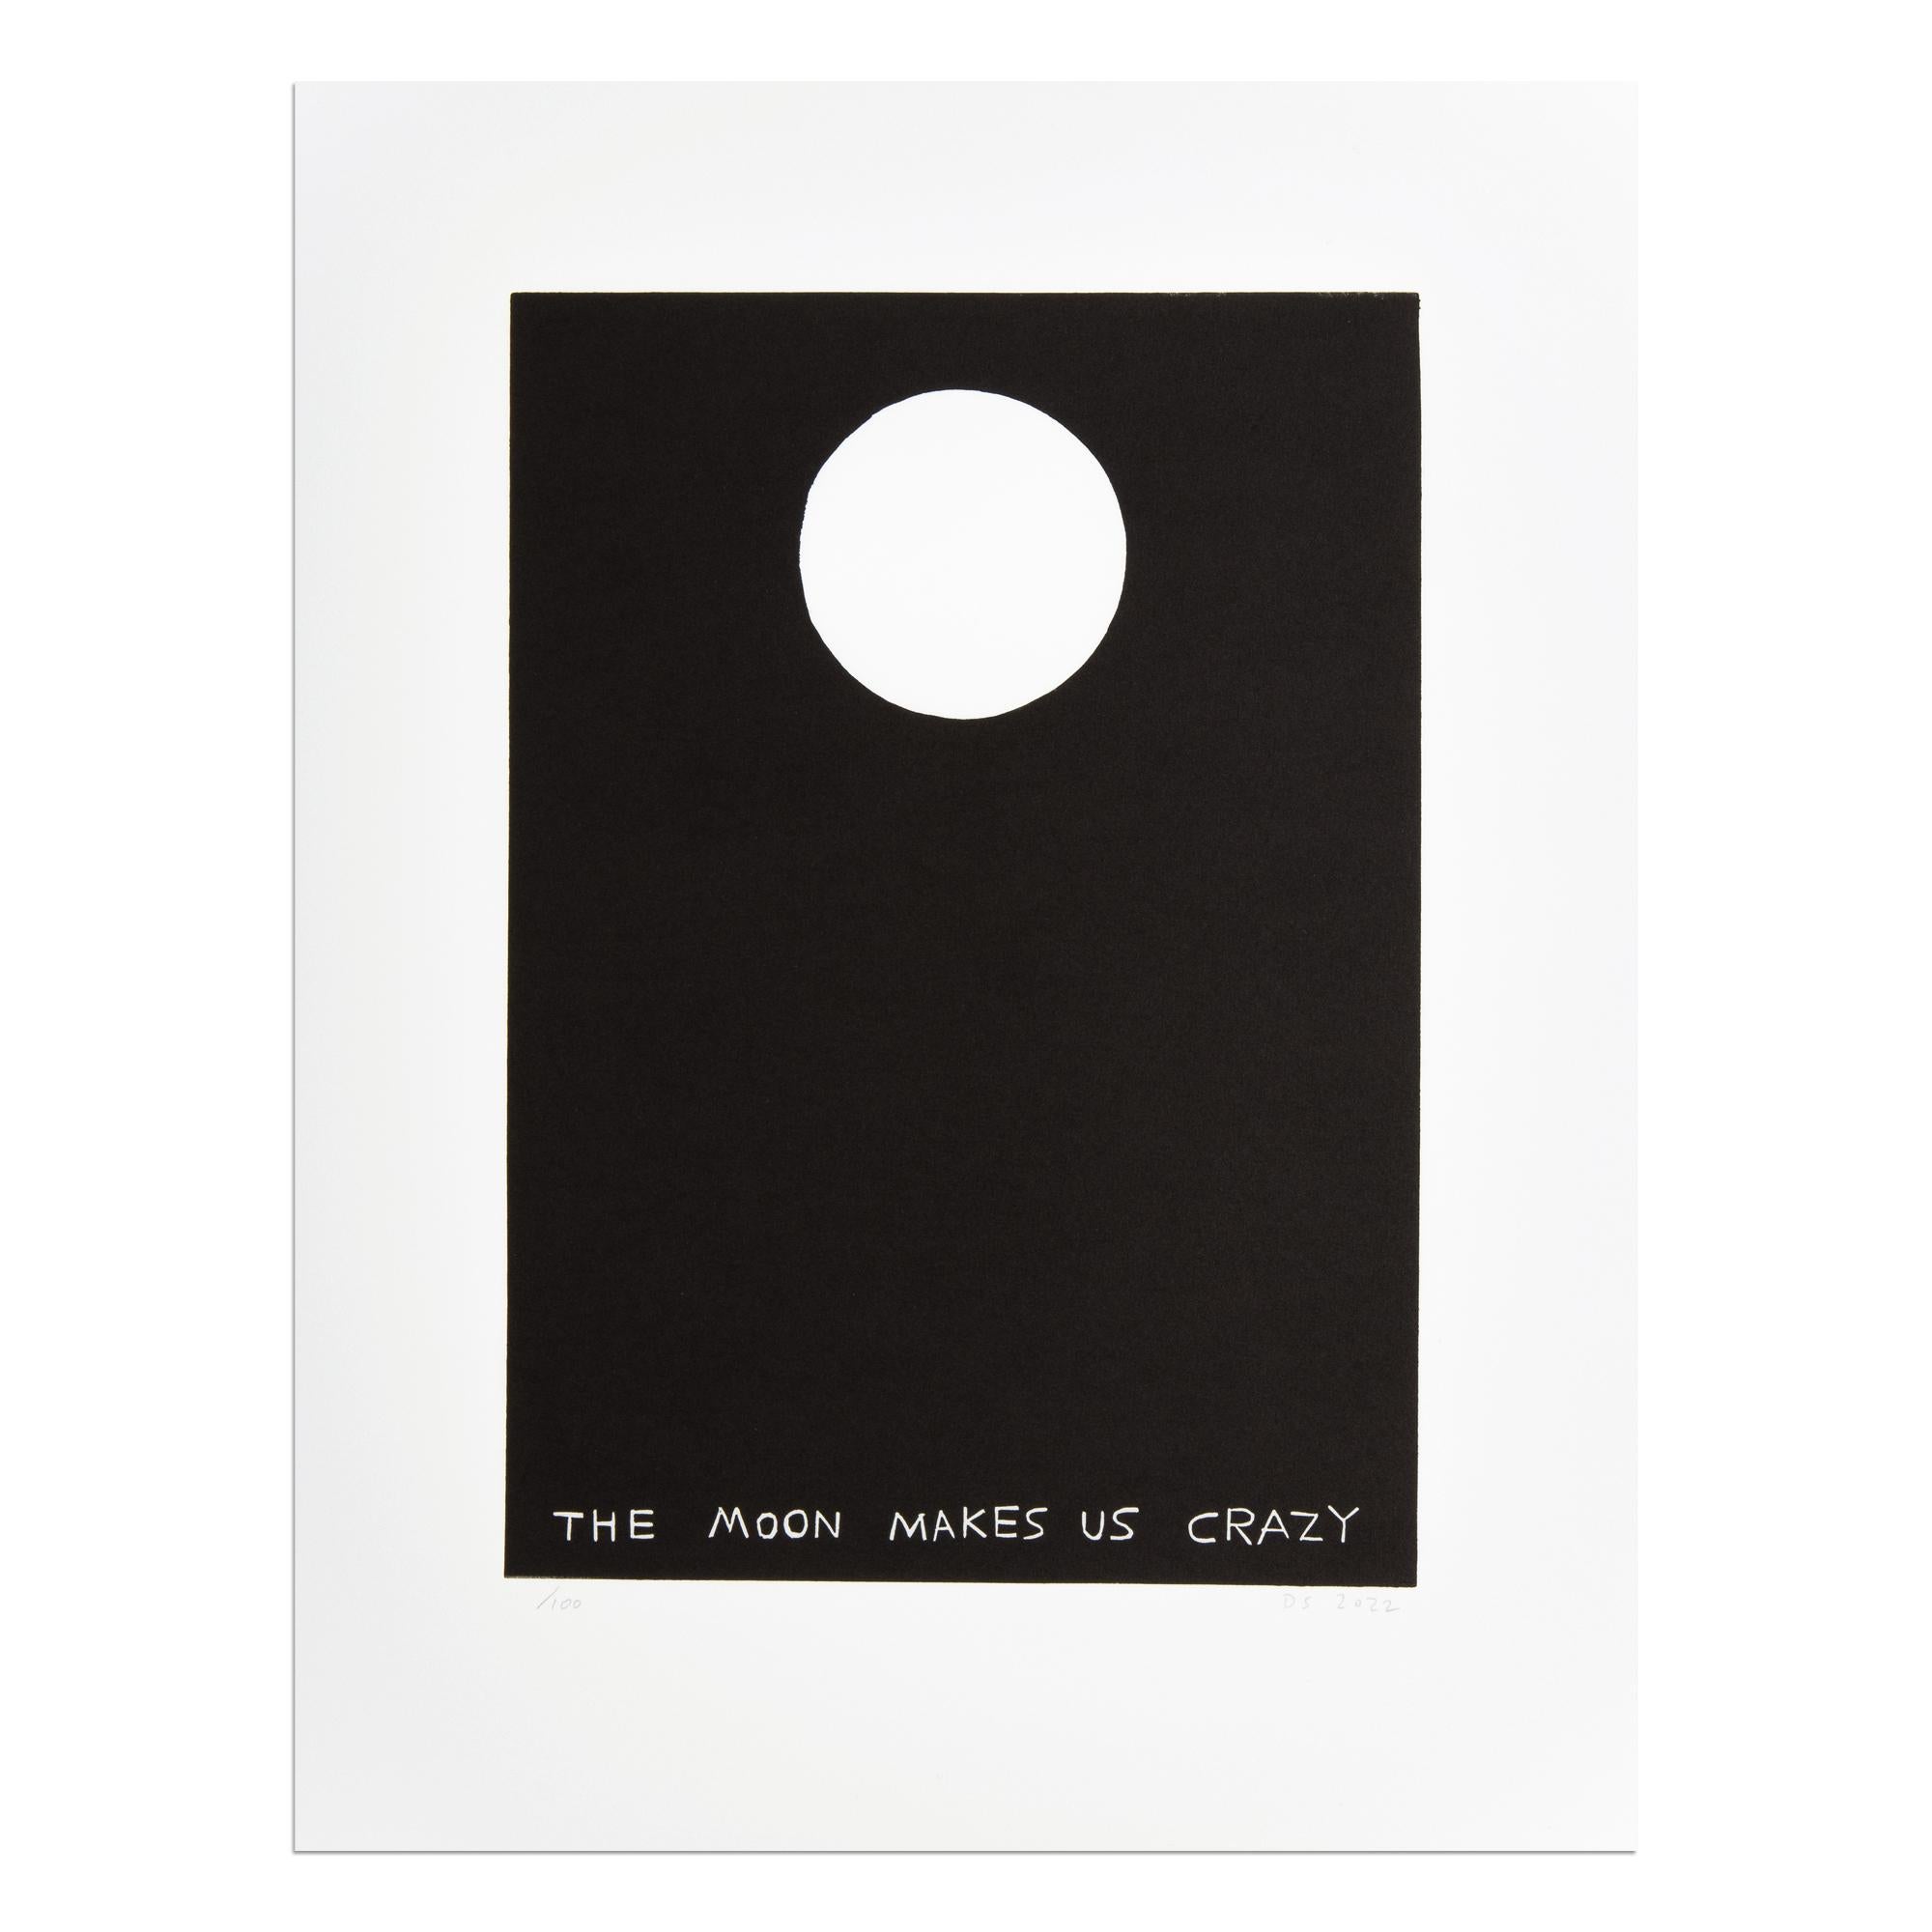 David Shrigley (British, b. 1968)
The Moon Makes Us Crazy, 2022
Medium: Linocut on paper
Dimensions: 41 x 31 cm
Edition of 100: Hand-signed and numbered
Condition: Mint